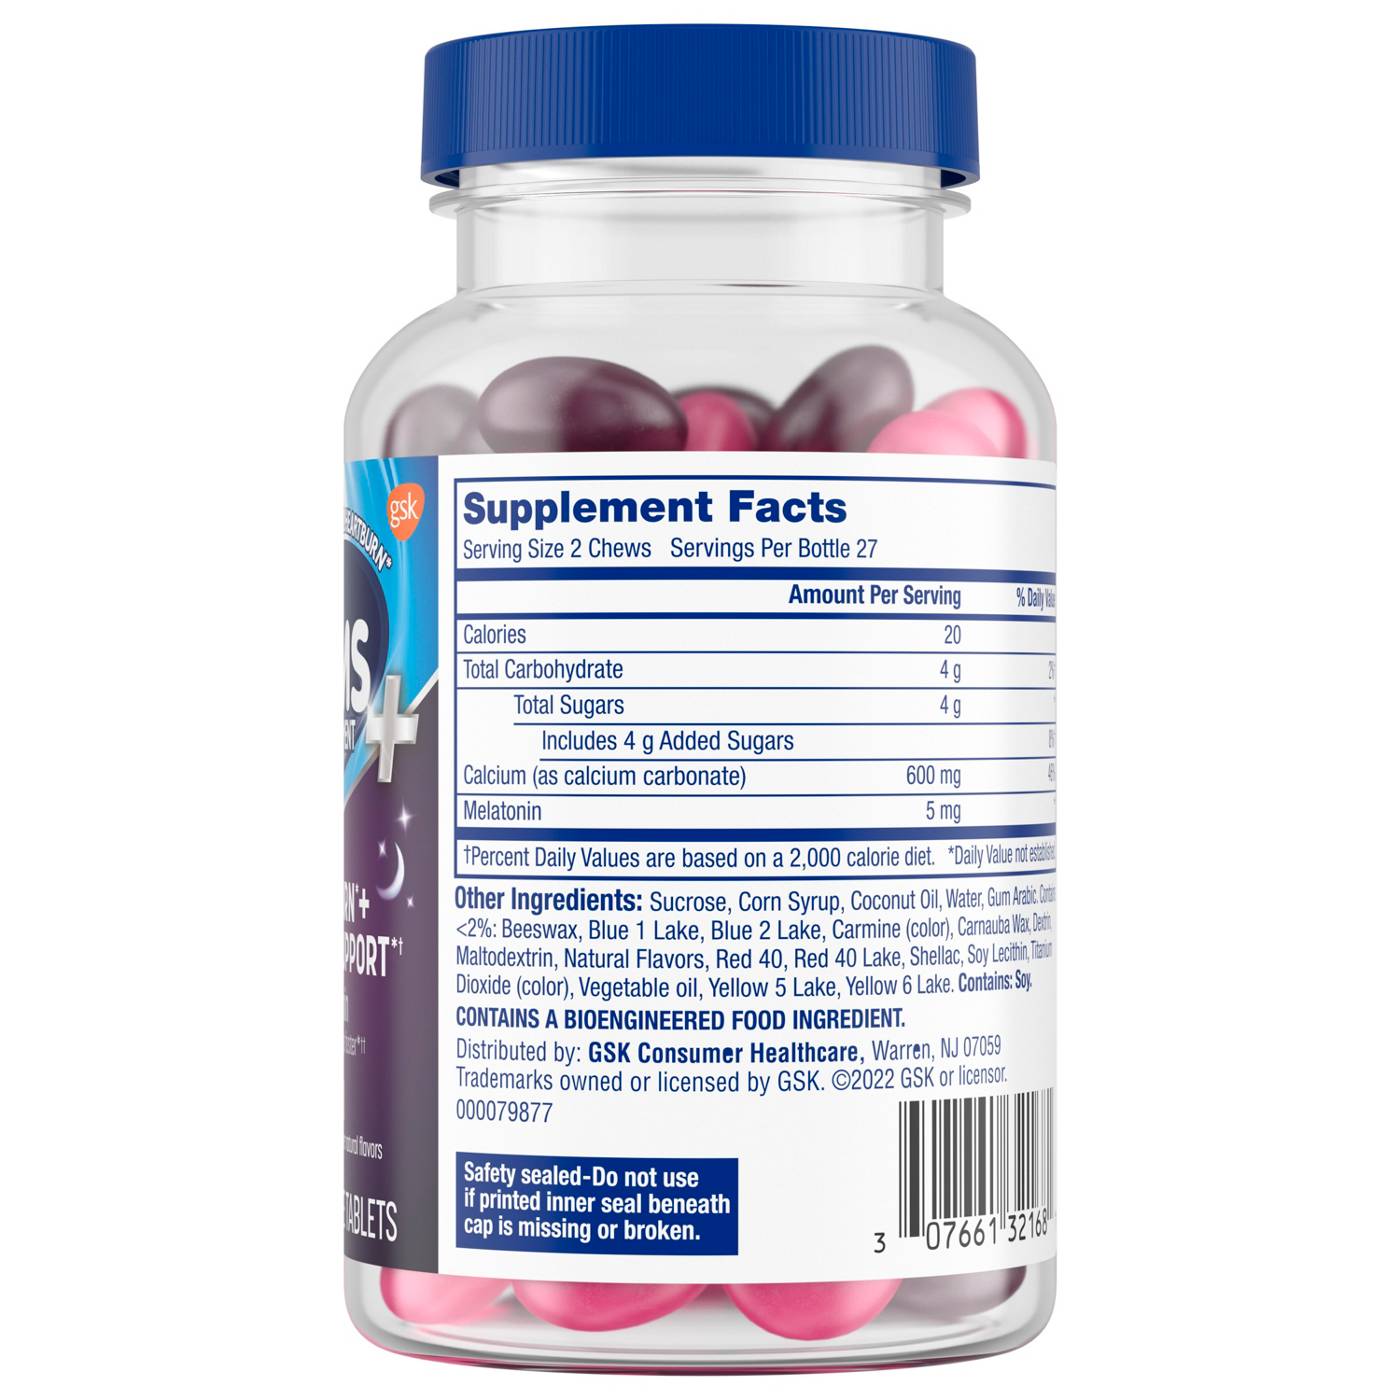 Tums Plus Heartburn + Sleep Support - Berry Fusion; image 2 of 2